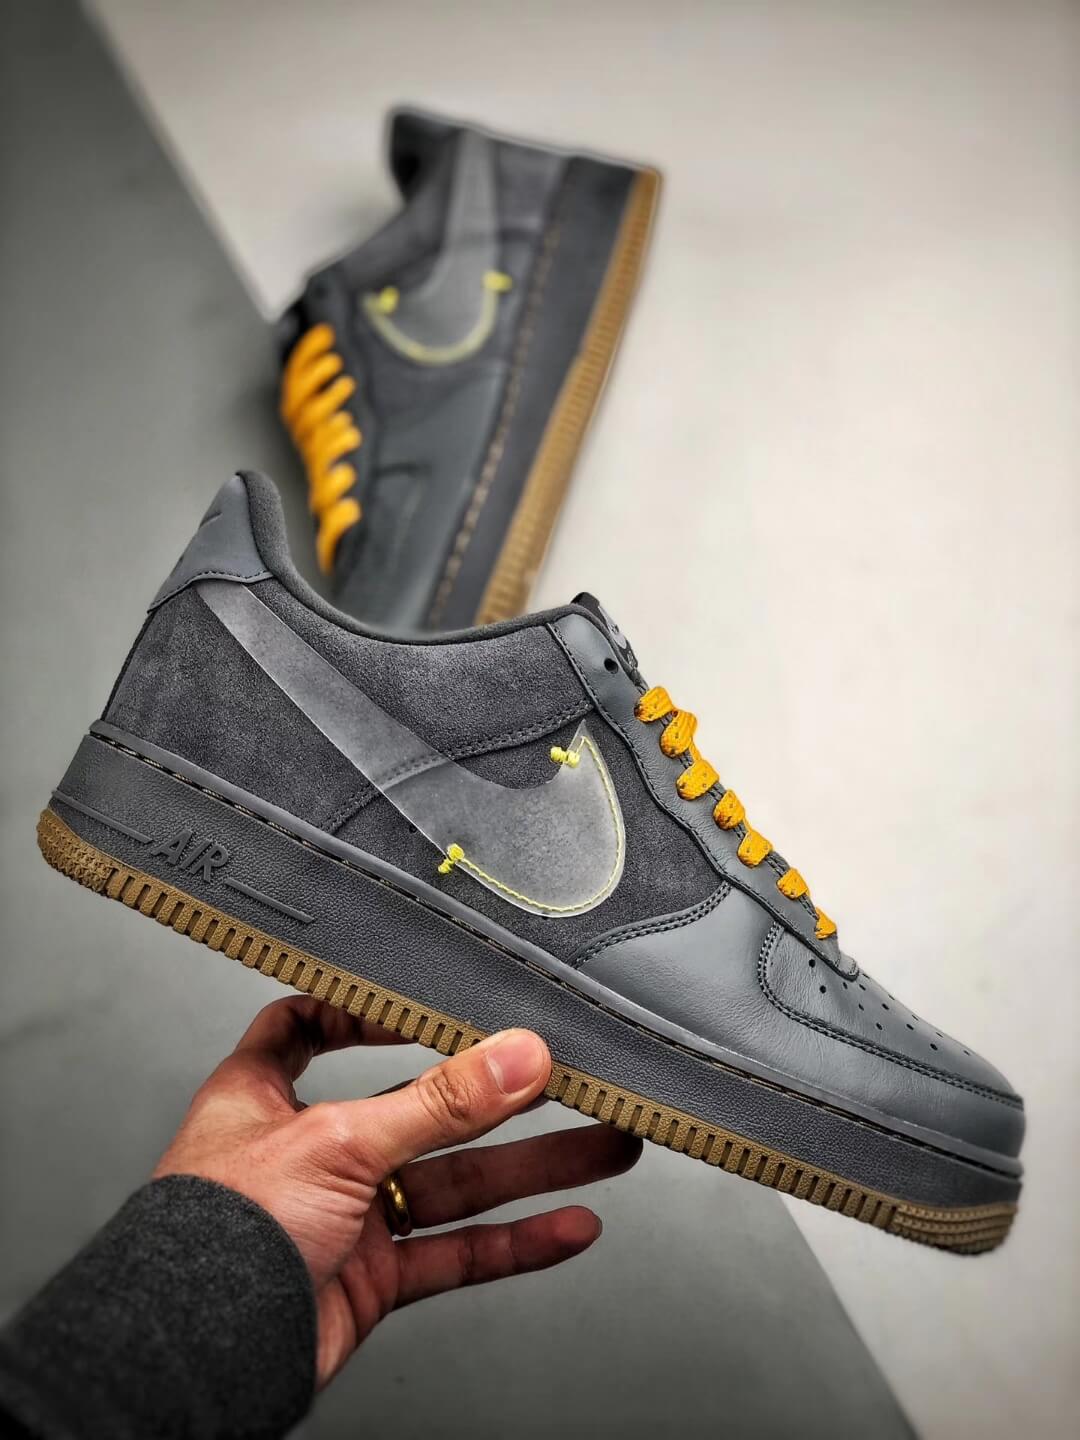 nike air force grey and yellow